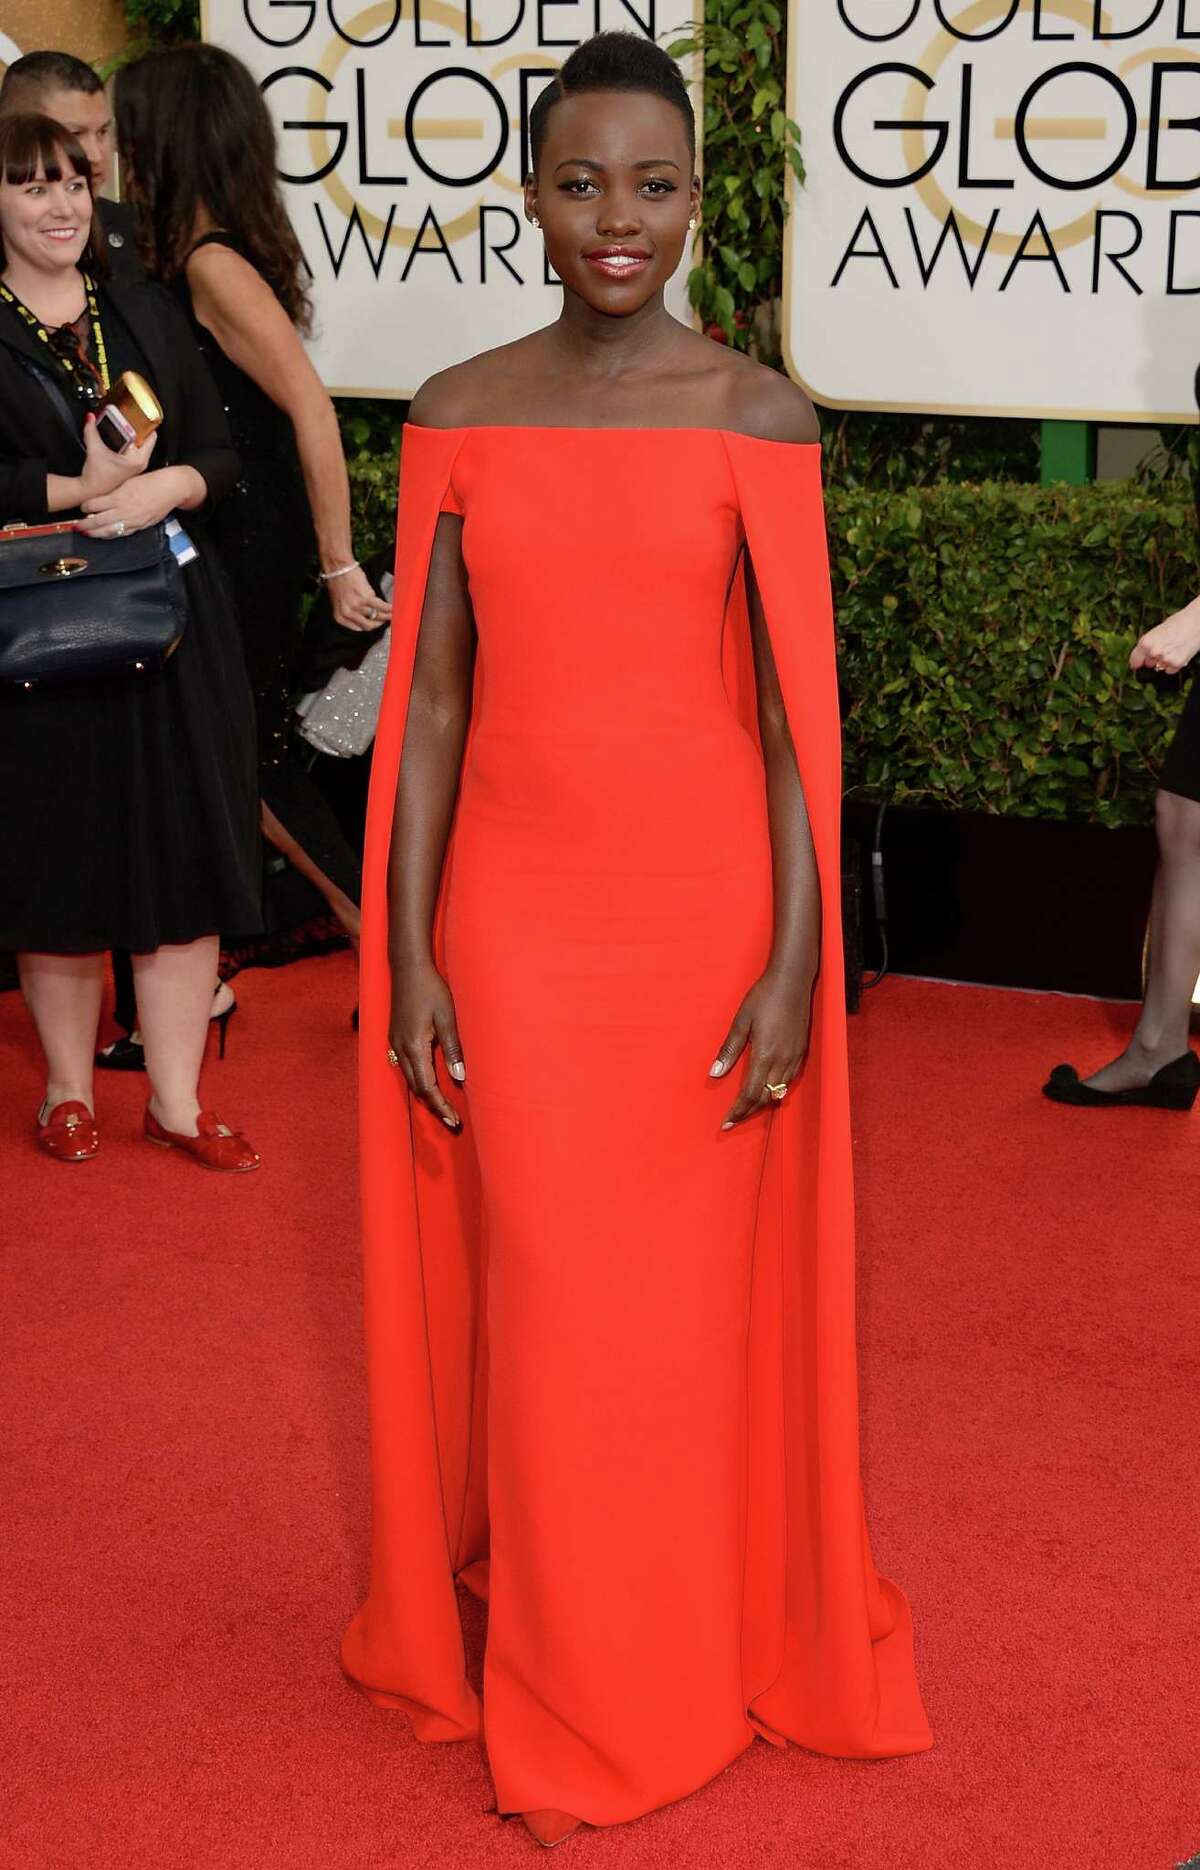 Lupita Nyong'o is a caped wonder in her orange-red Ralph Lauren gown with minimal accessories. This is how to do it.